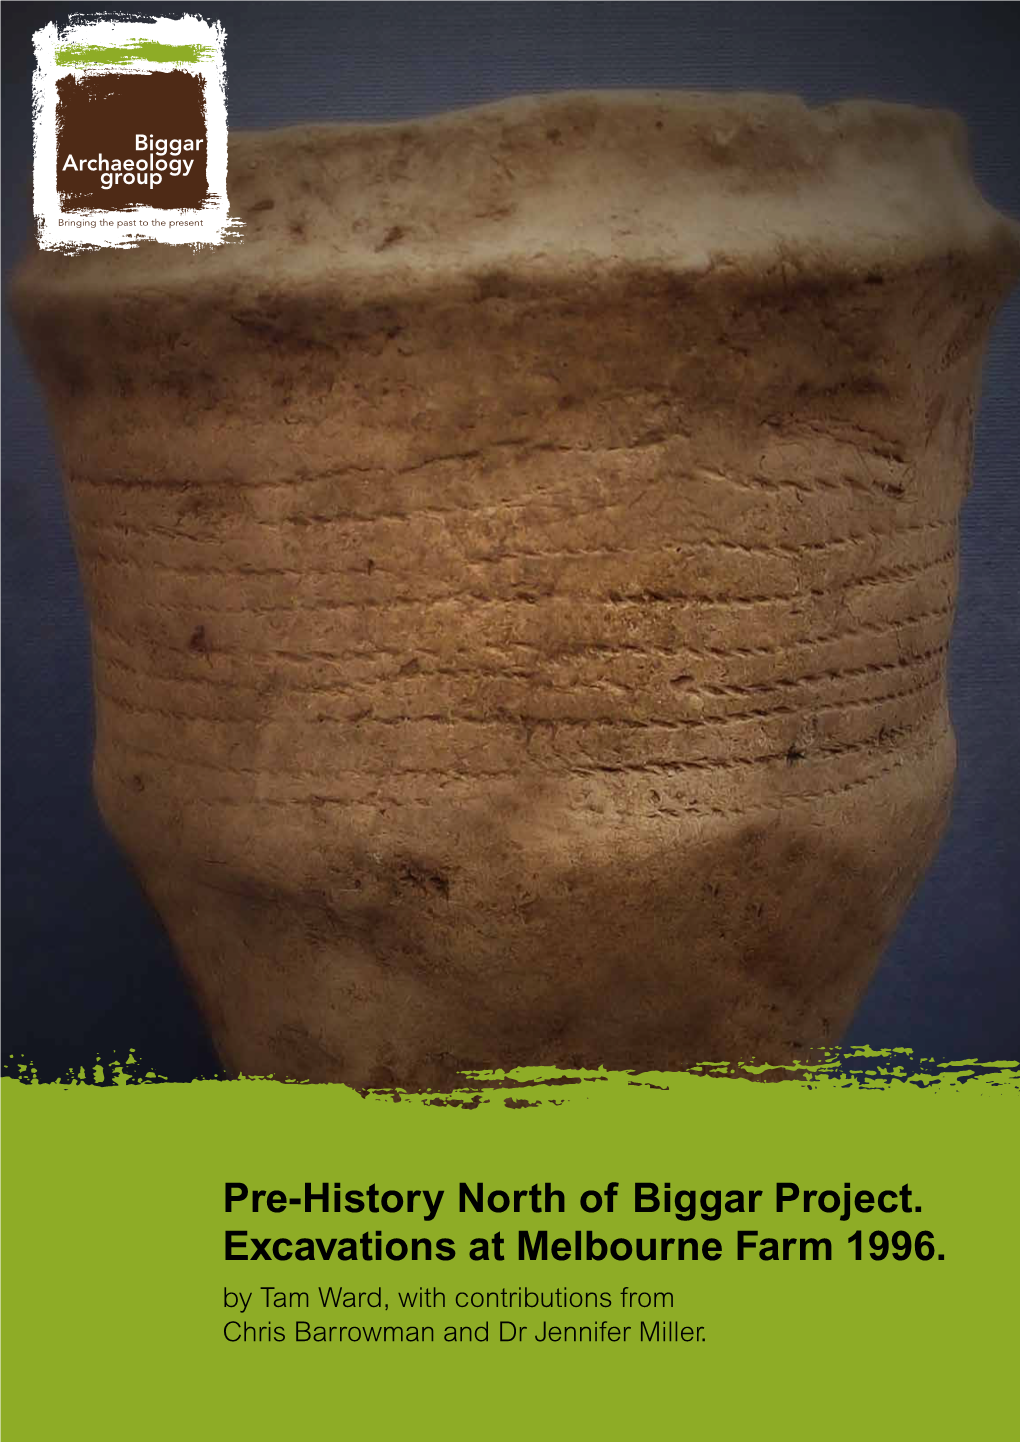 Pre-History North of Biggar Project. Excavations at Melbourne Farm 1996. by Tam Ward, with Contributions from Chris Barrowman and Dr Jennifer Miller